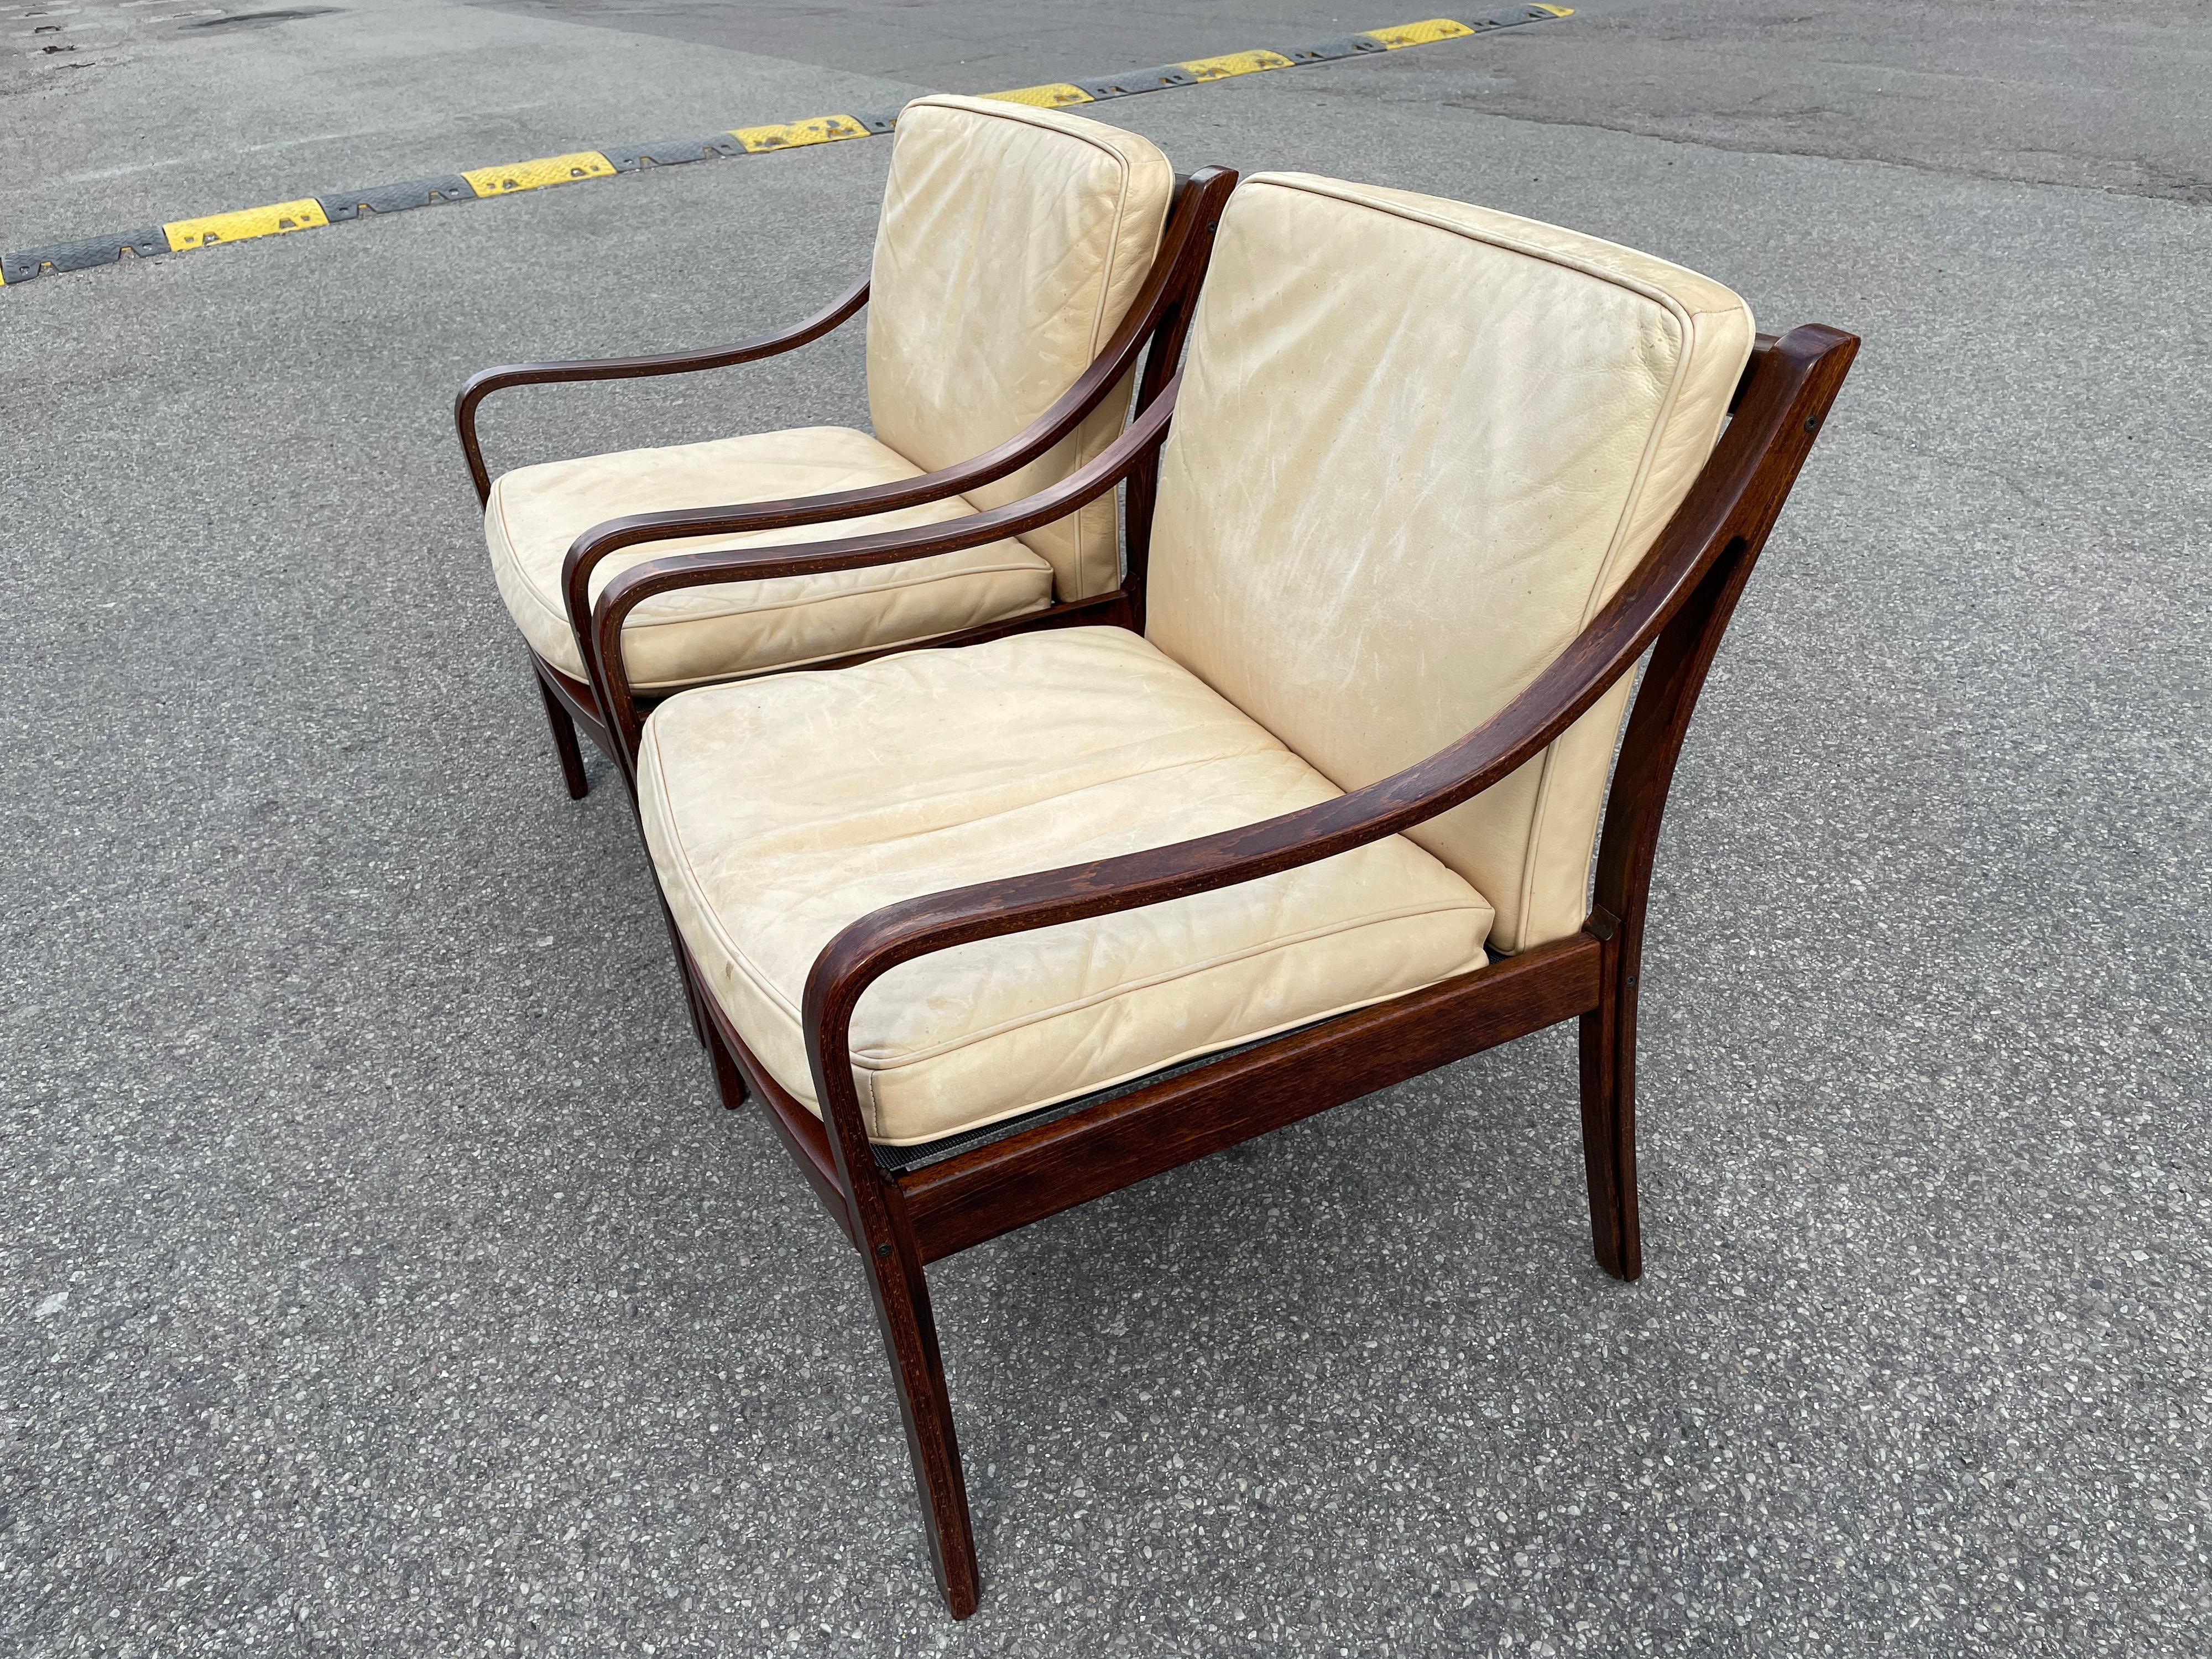 Elegant and exceptionally rare vintage circa 1968 model 108 lounge chairs, designed by Fredrik Kayser for Vatne Möbler.
The frame of the chairs is made with a stunning rosewood.

This chair is quite possibly Fredrick’s best work and won an award